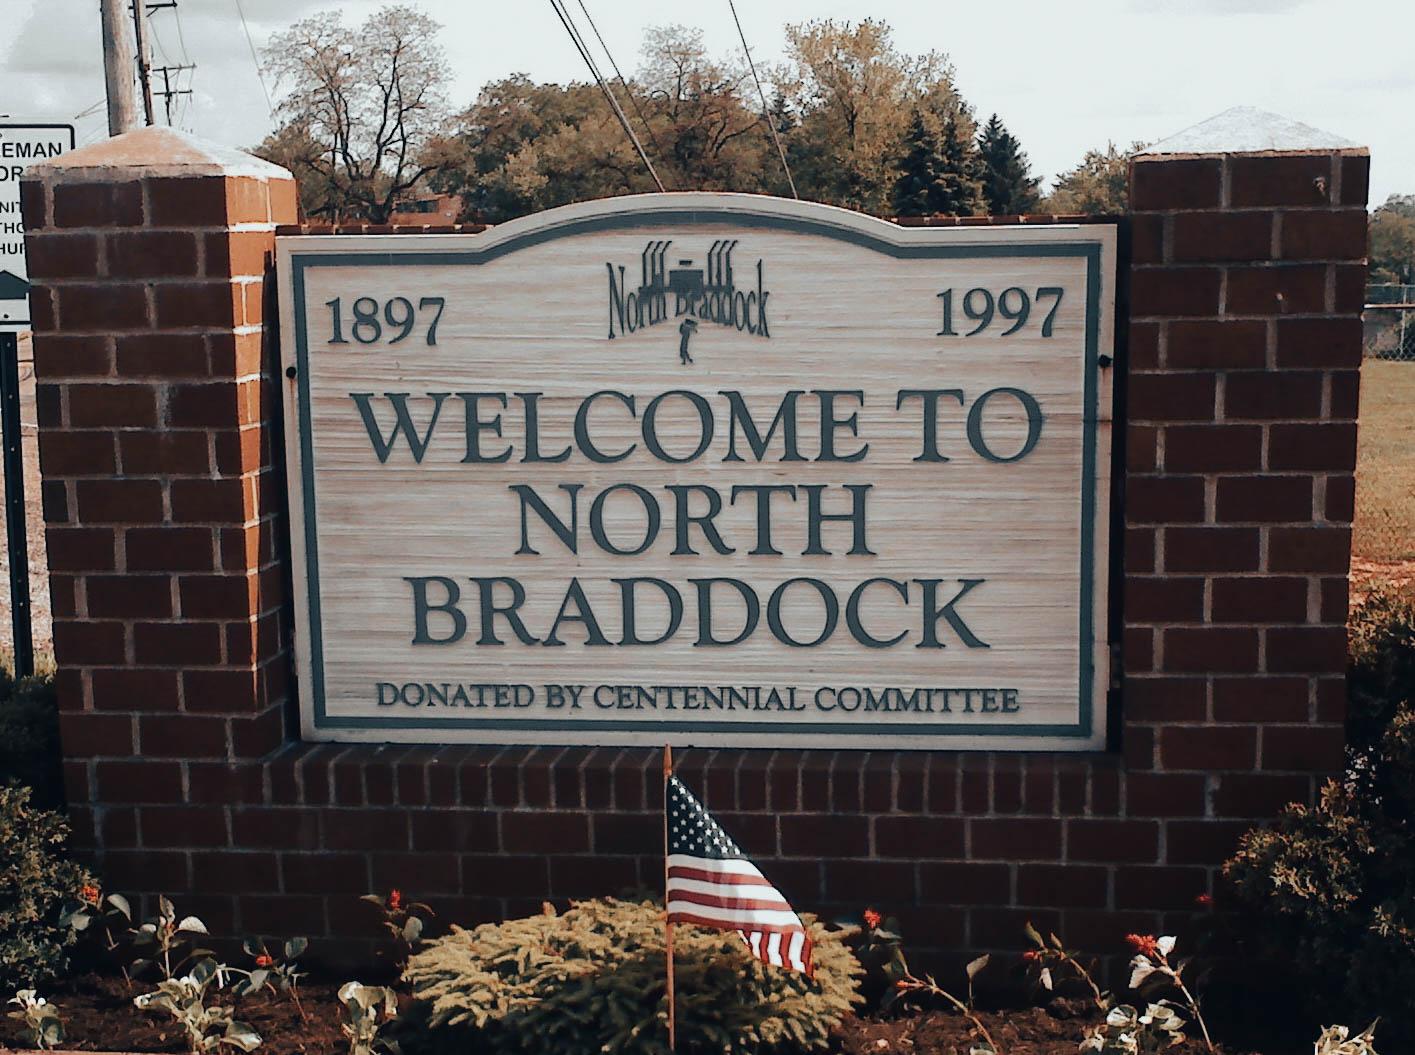 Is North Braddock Tap Water Safe to Drink? Tap water & safety quality